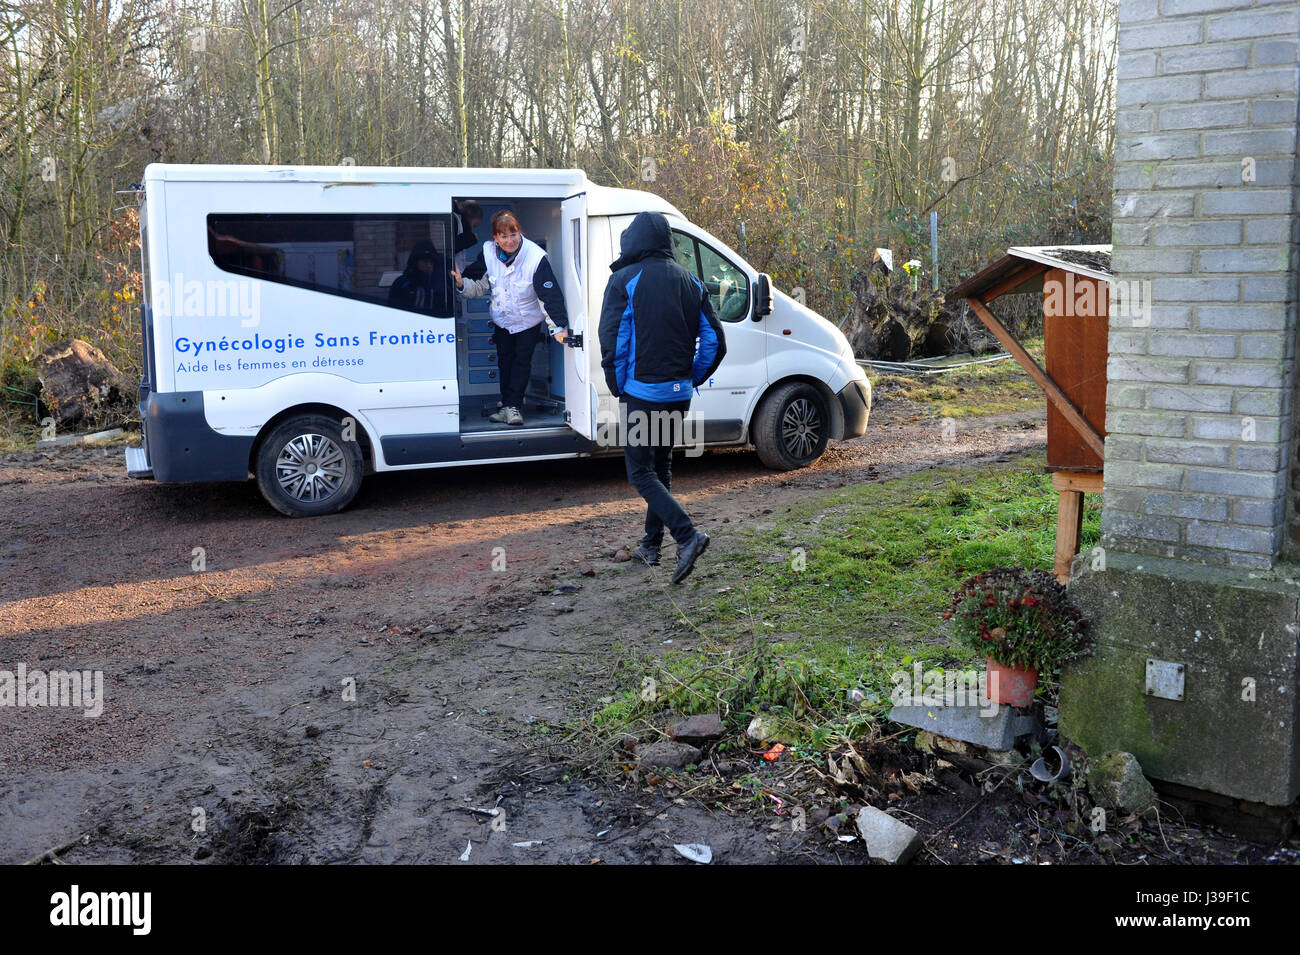 Reportage on volunteers with the french charity, gynecologists without borders who work in refugee camps near calais in the north of france. Stock Photo